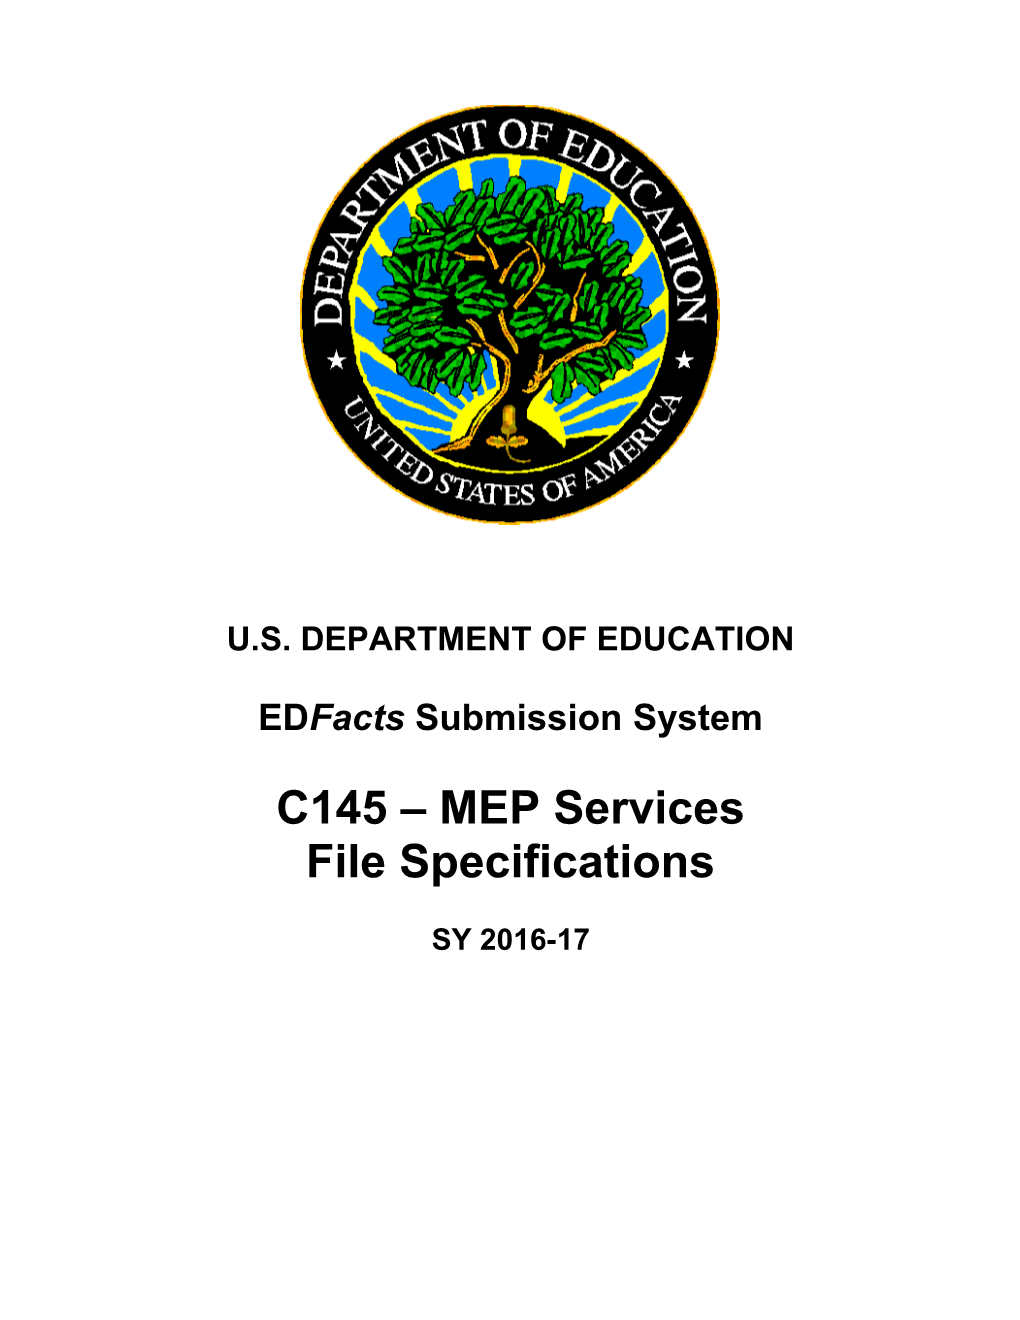 C145 - MEP Services File Specifications (Msword)